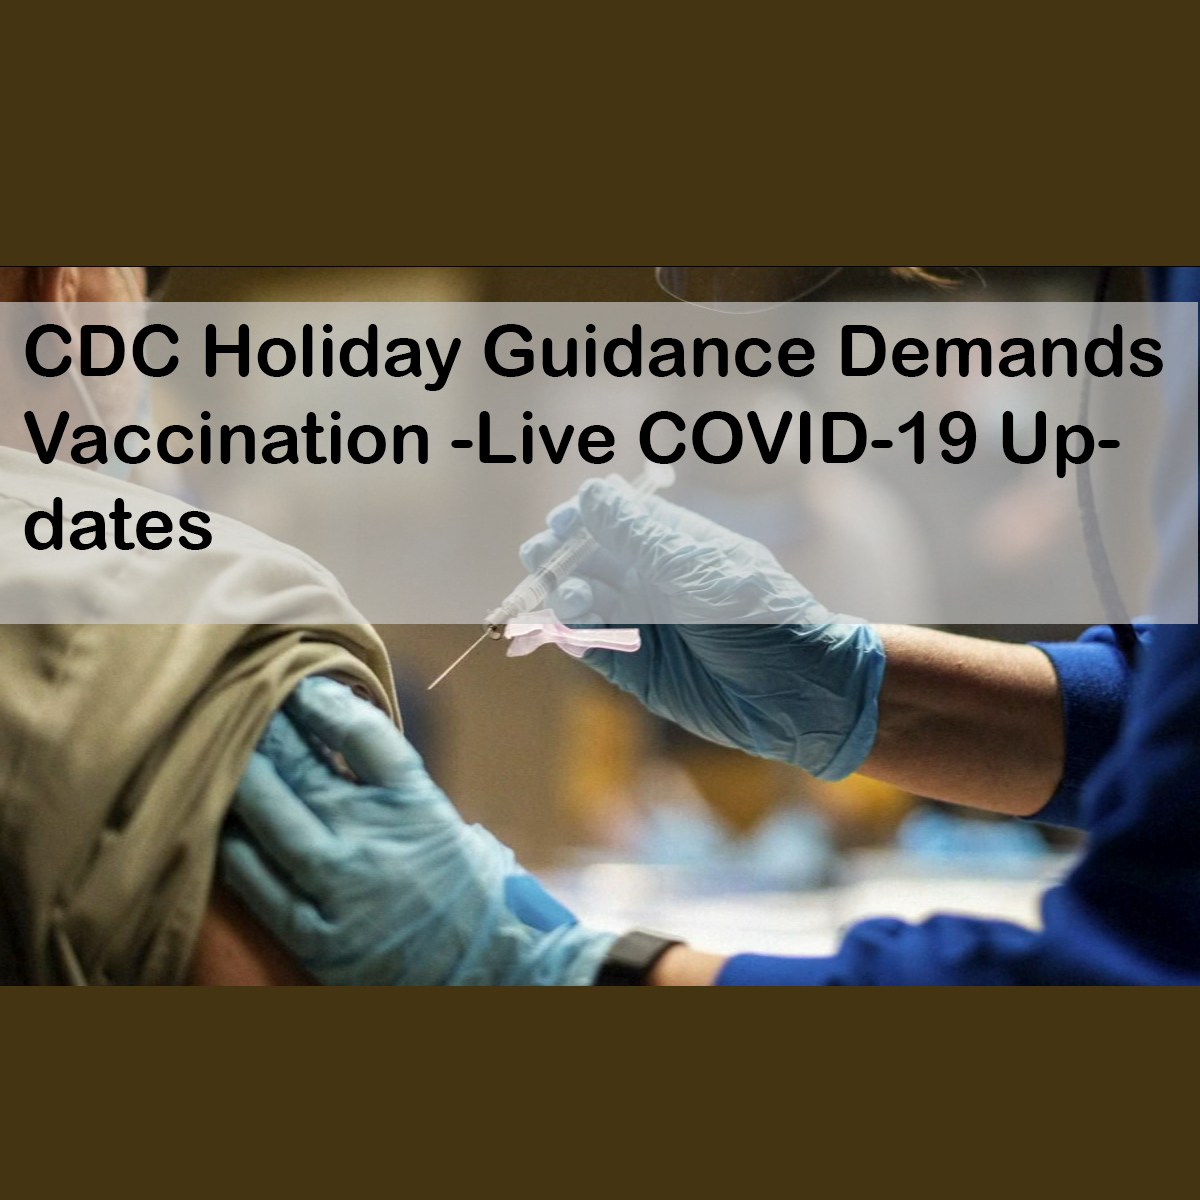 CDC Holiday Guidance Demands Vaccination -Live COVID-19 Updates